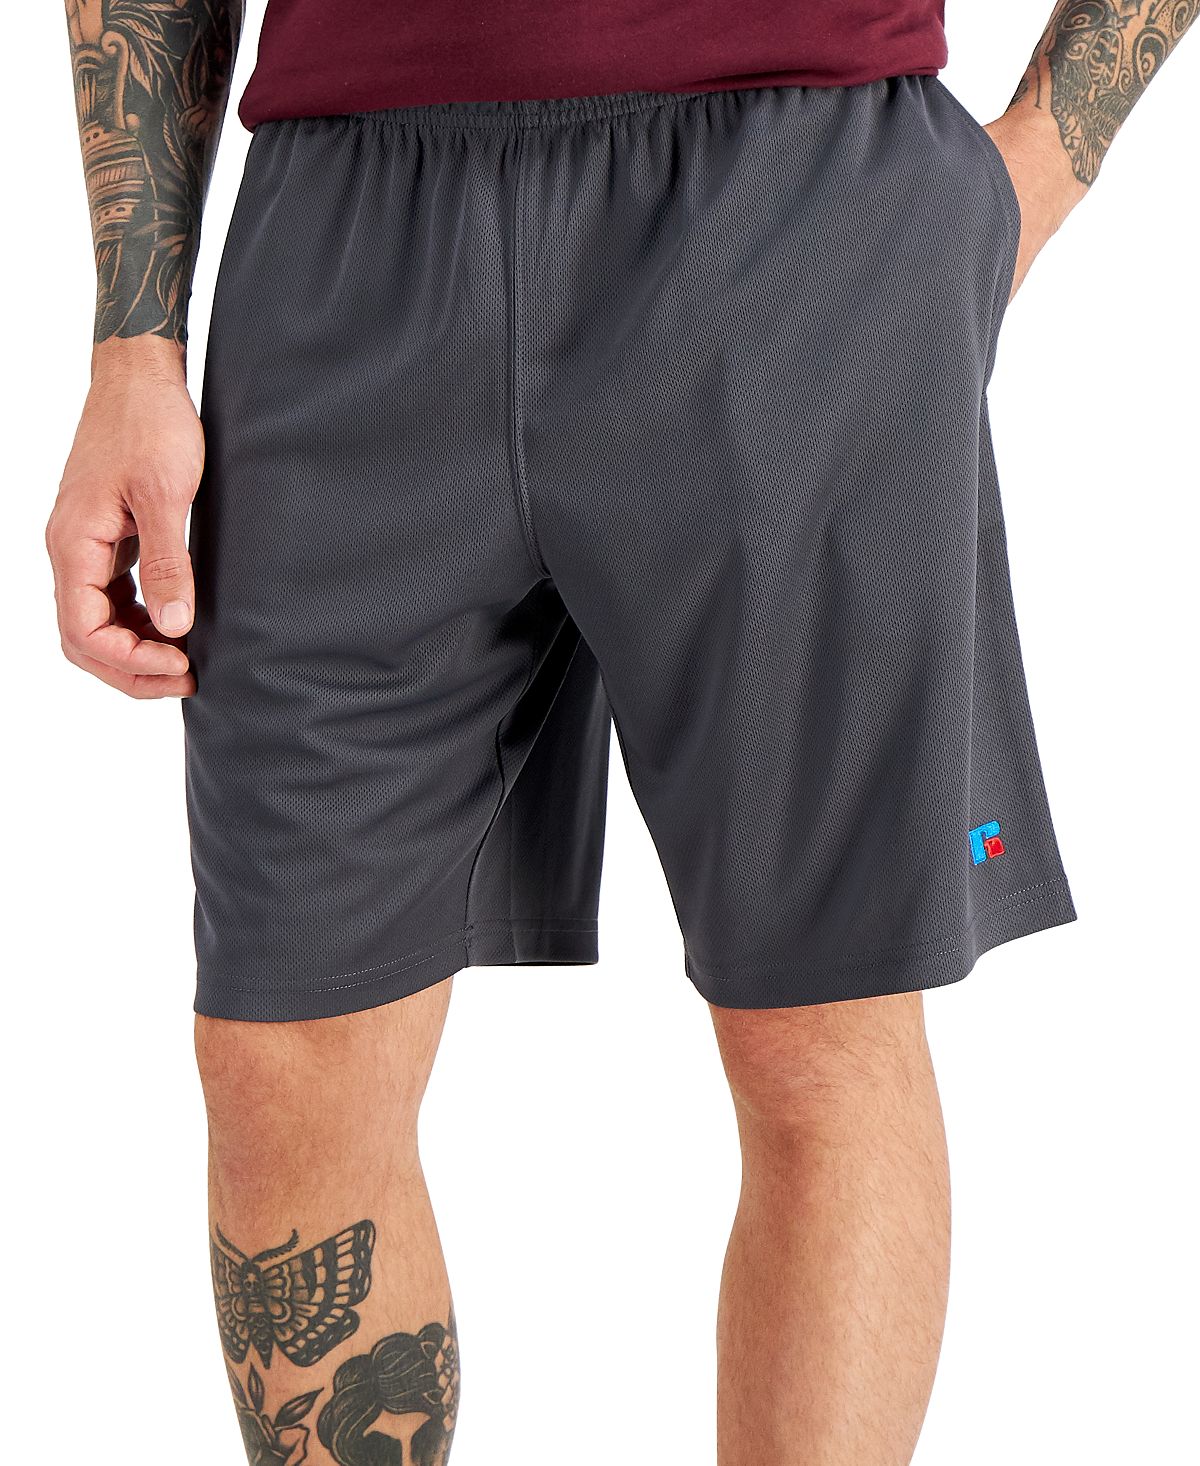 Russell Athletic Mesh Performance 9" Shorts Gravel